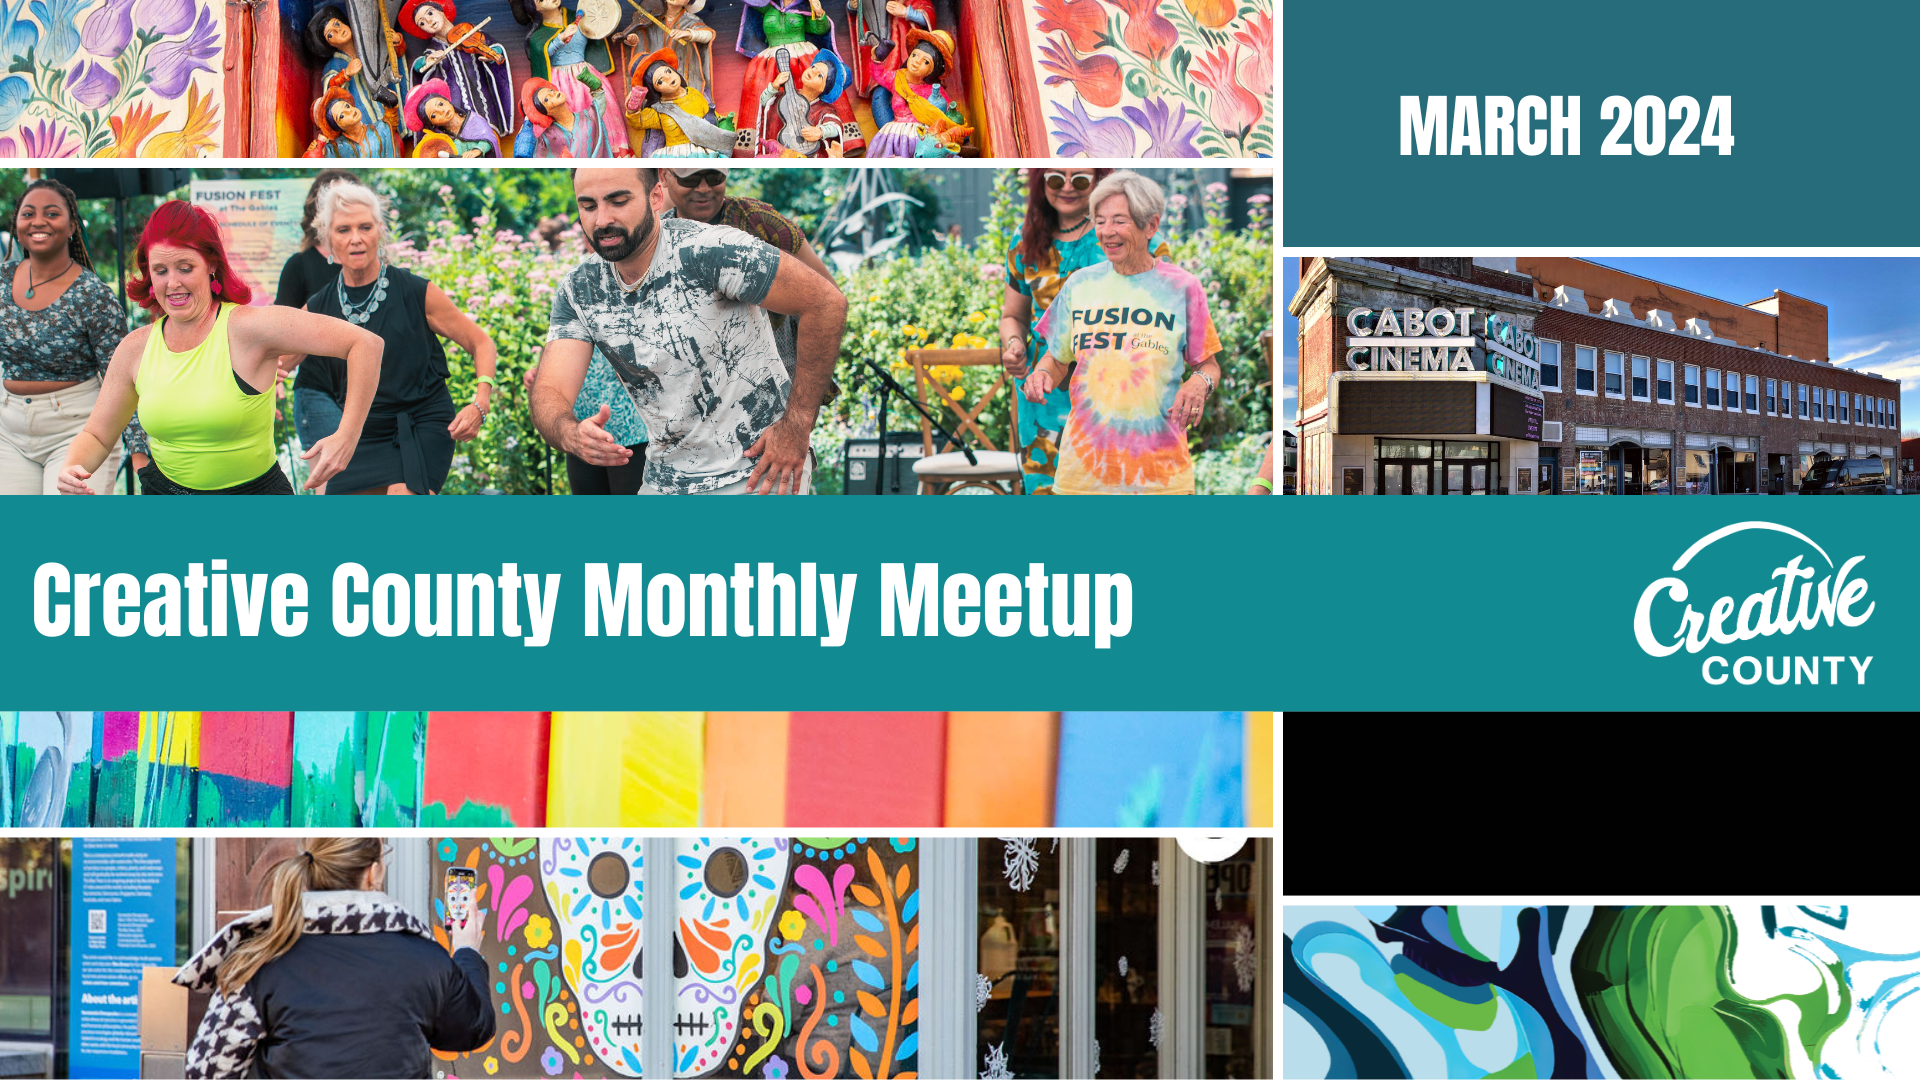 Monthly community gathering in Creative County.